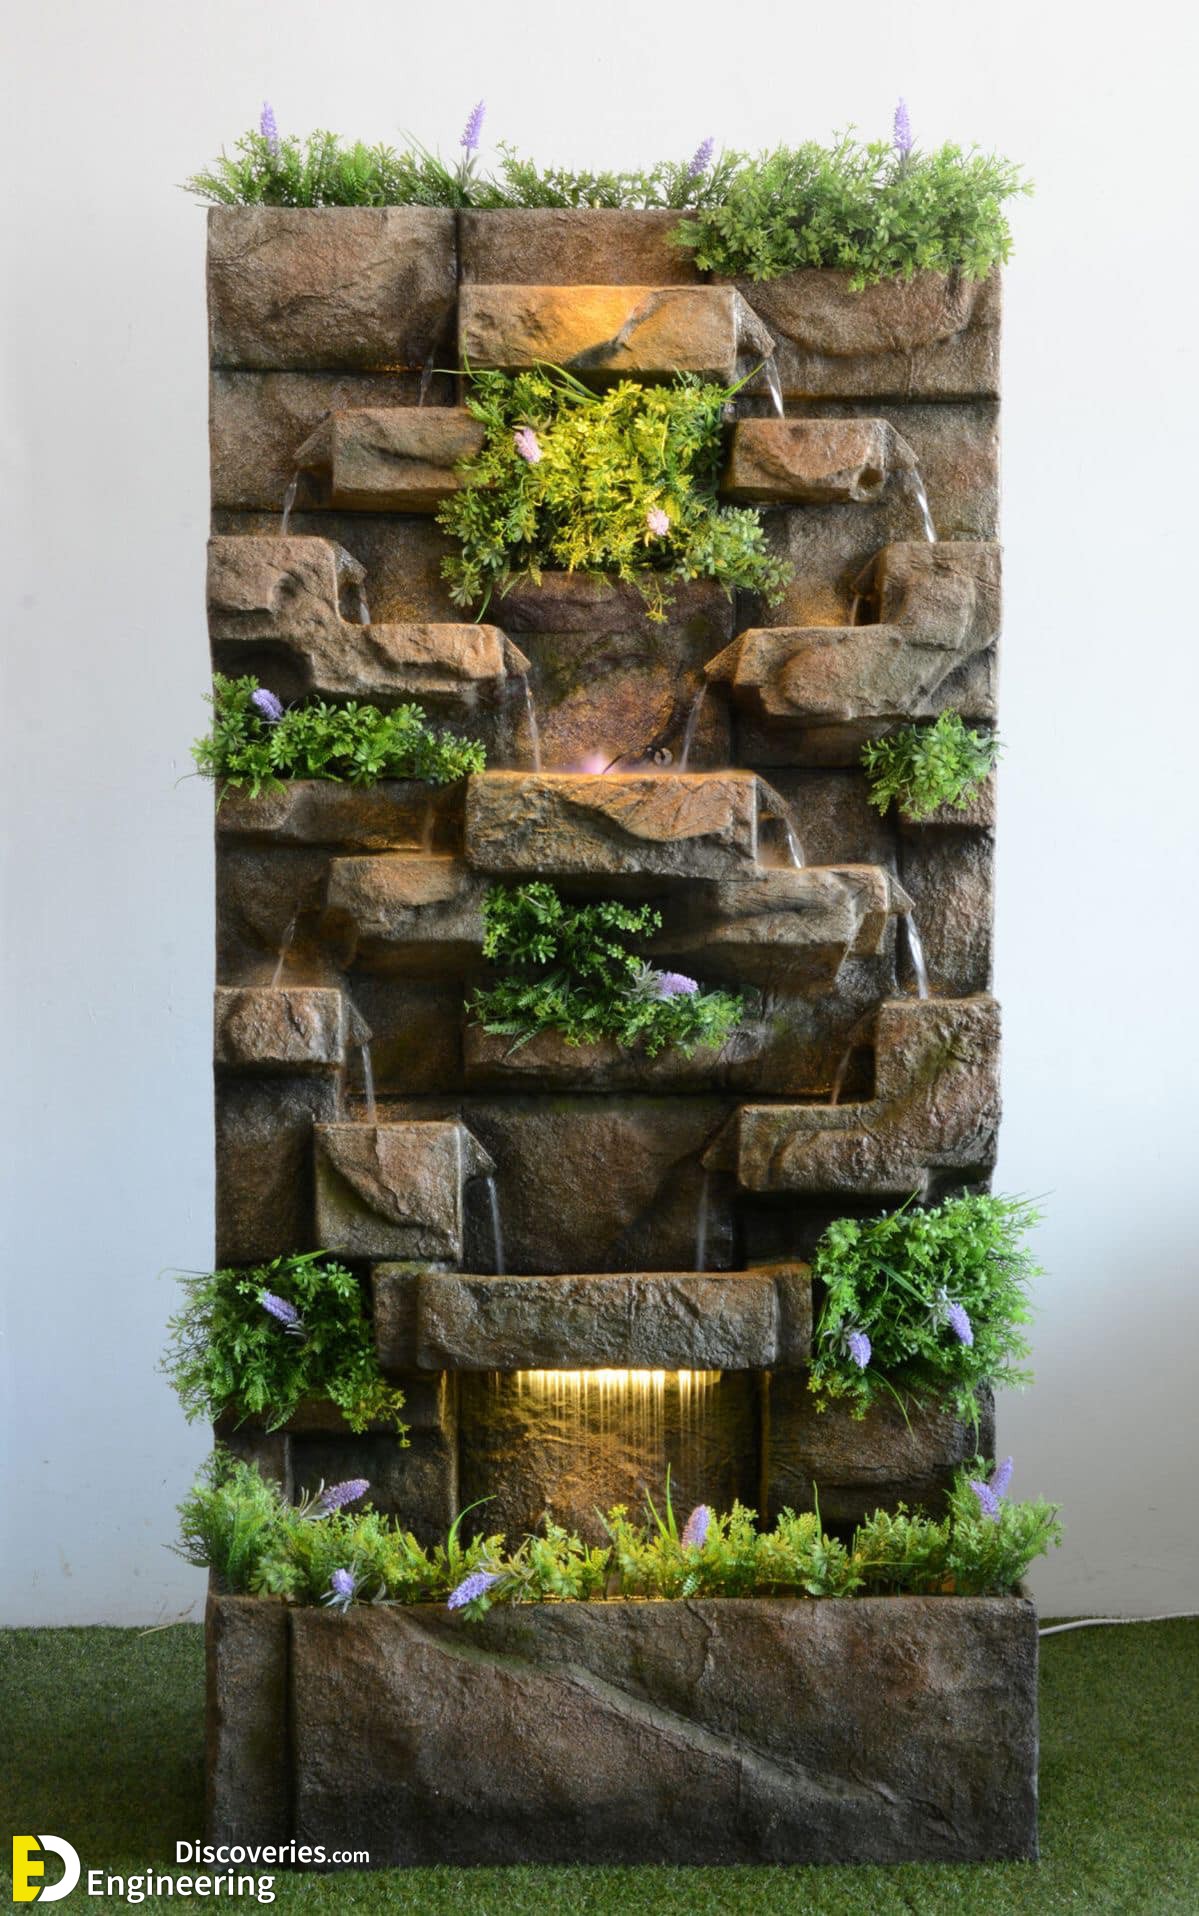 22 engineering discoveries amazing water fountain ideas to transform your home into a serene oasis